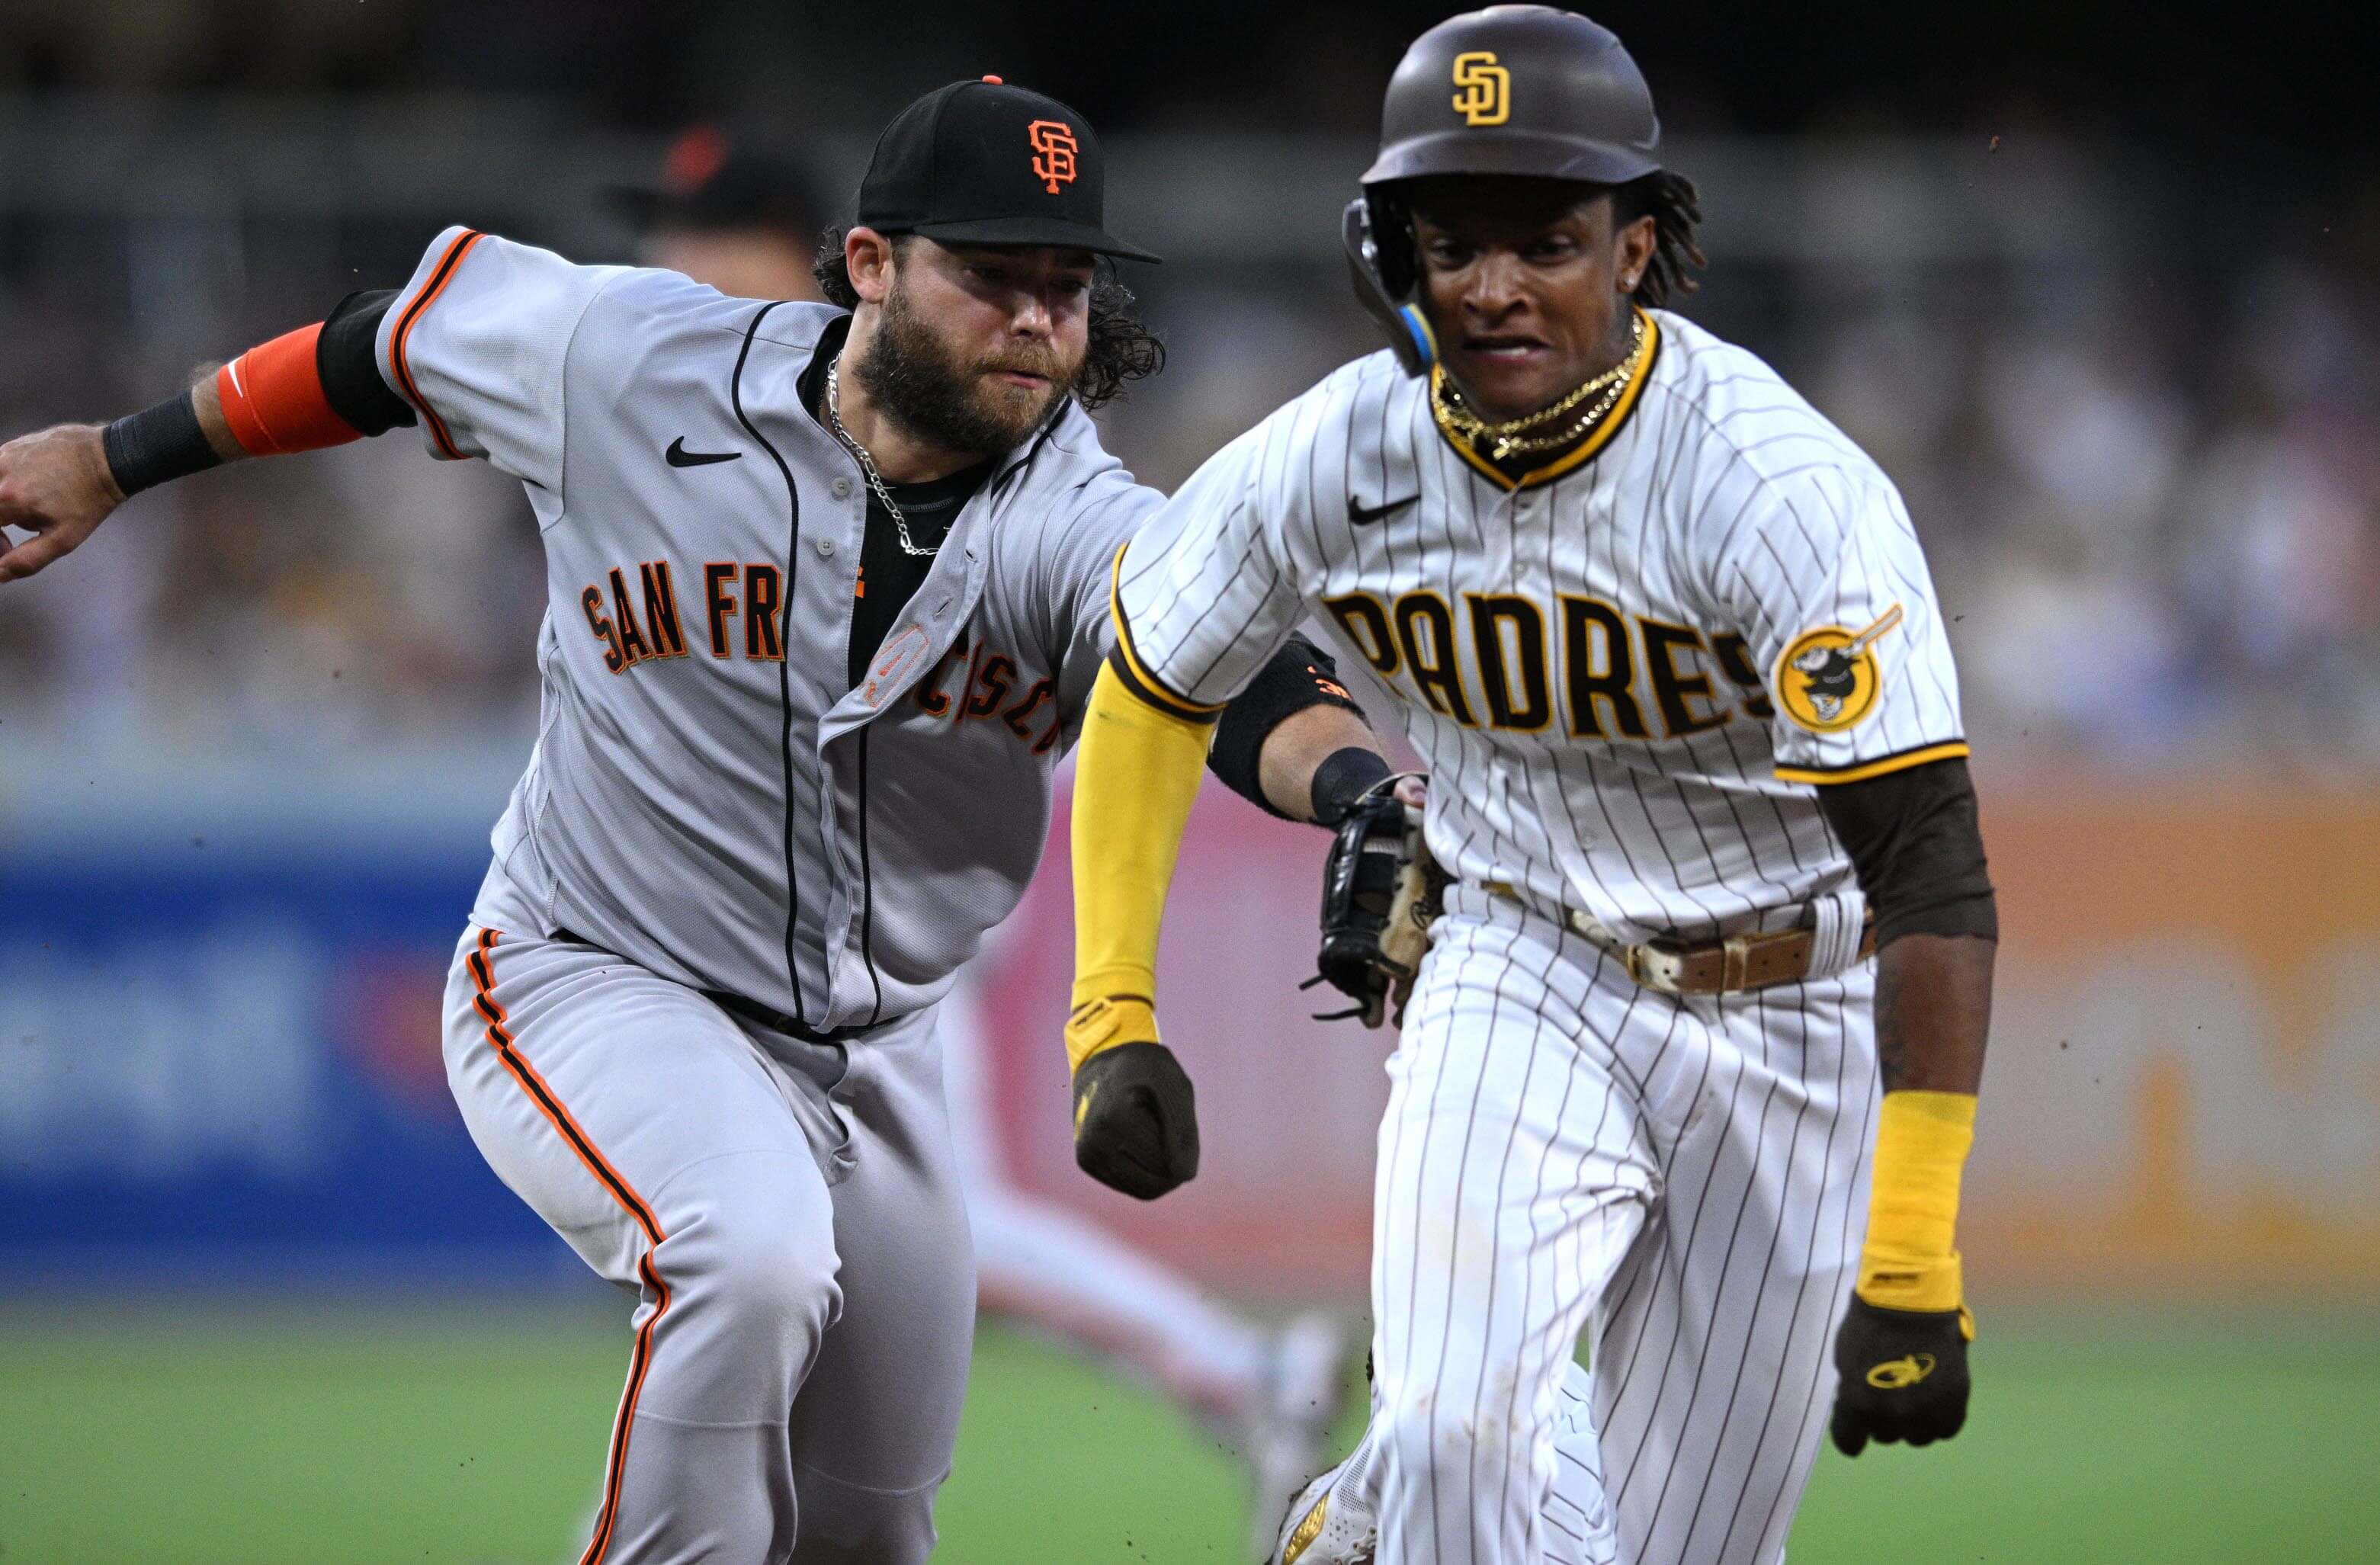 an Francisco Giants shortstop Brandon Crawford (left) tags San Diego Padres shortstop baseman C.J. Abrams (right) out after being caught in a rundown attempting to steal second base during the third inning at Petco Park.